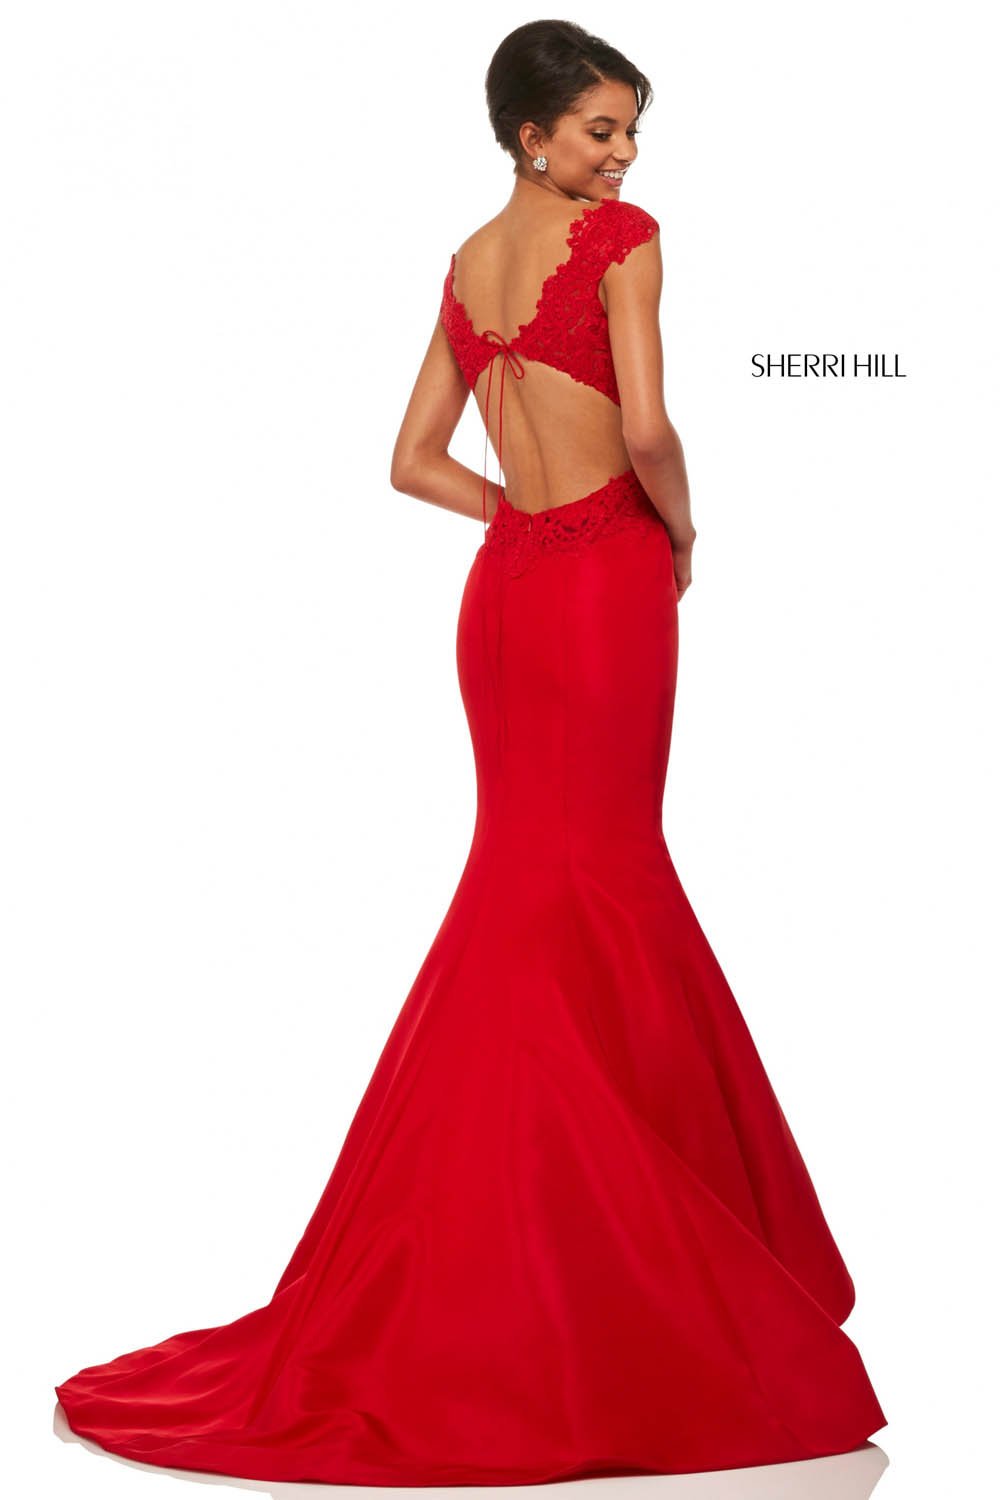 Sherri Hill 52772 dress images in these colors: Yellow, Light Blue, Red, Black.